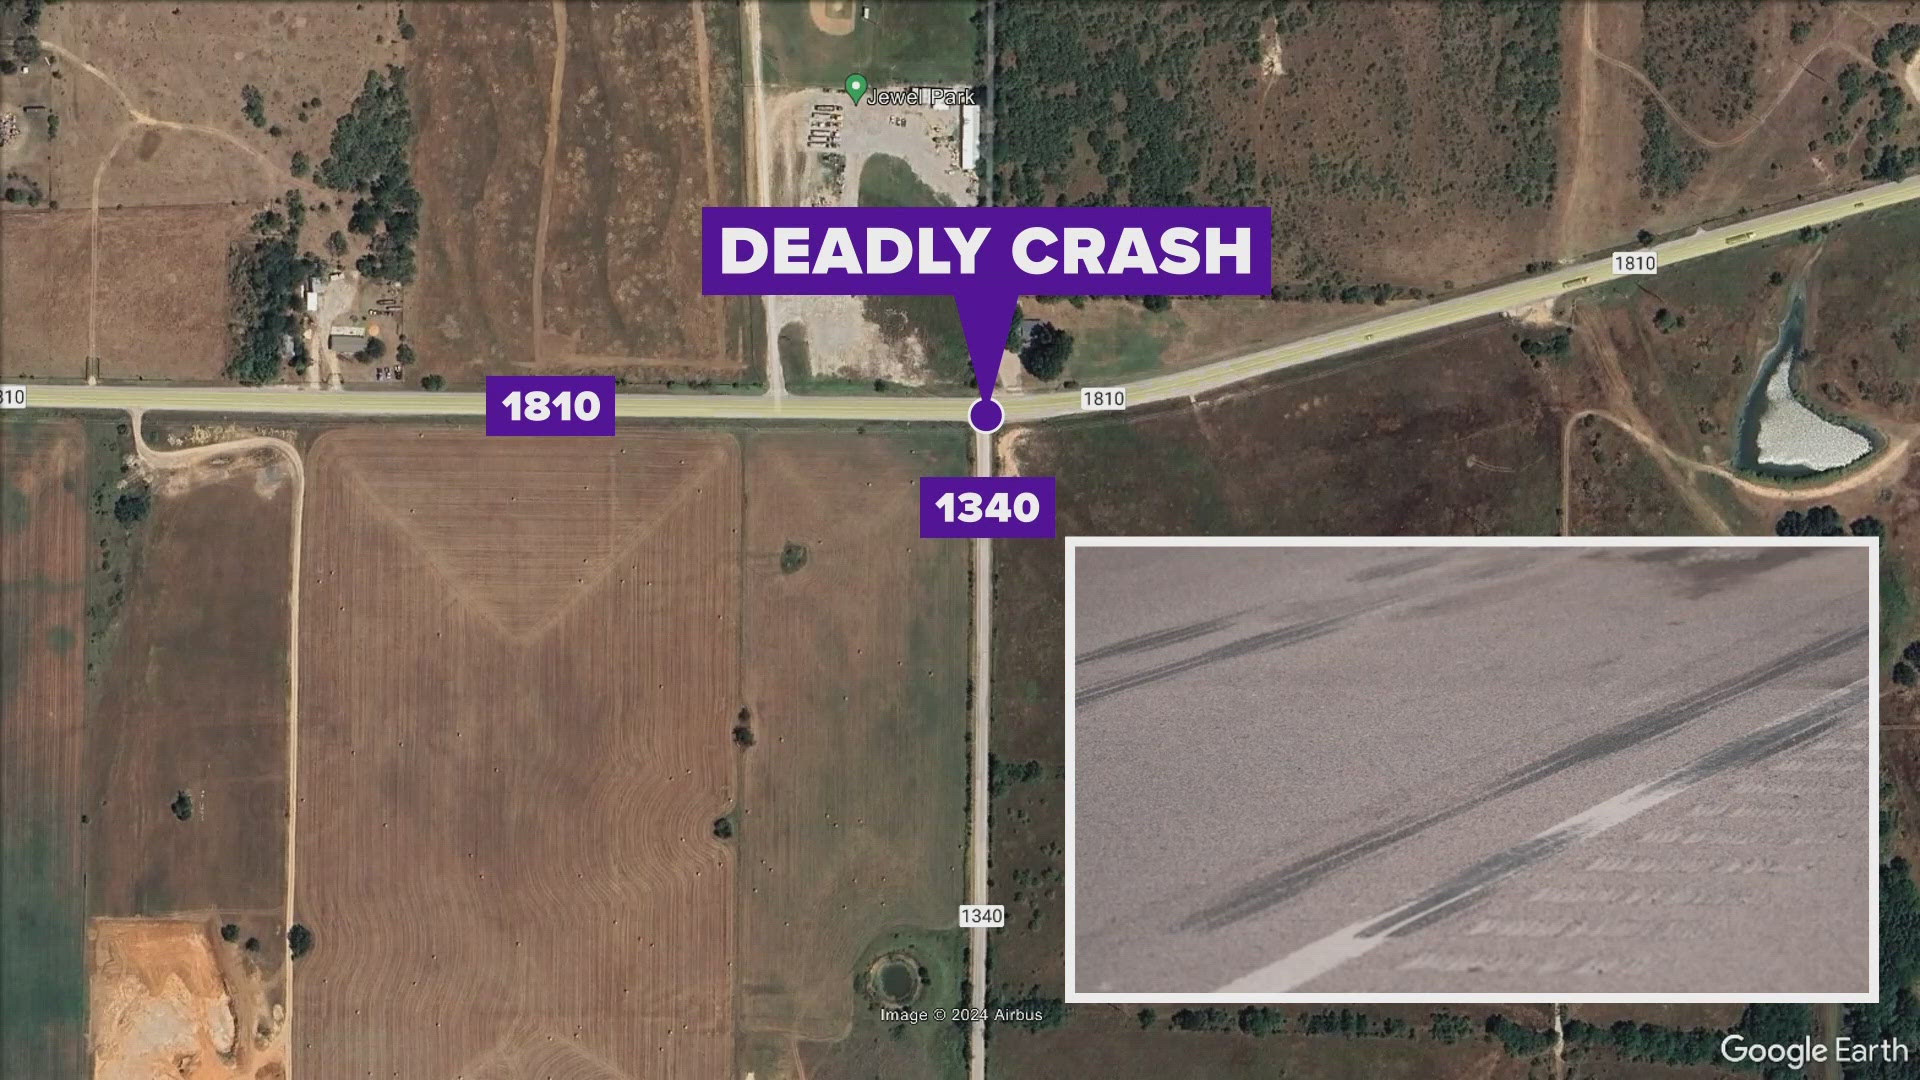 The crash happened around 6:30 a.m. on Farm Road 1810 at County Road 1340 east of Chico, according to the Texas Department of Public Safety.